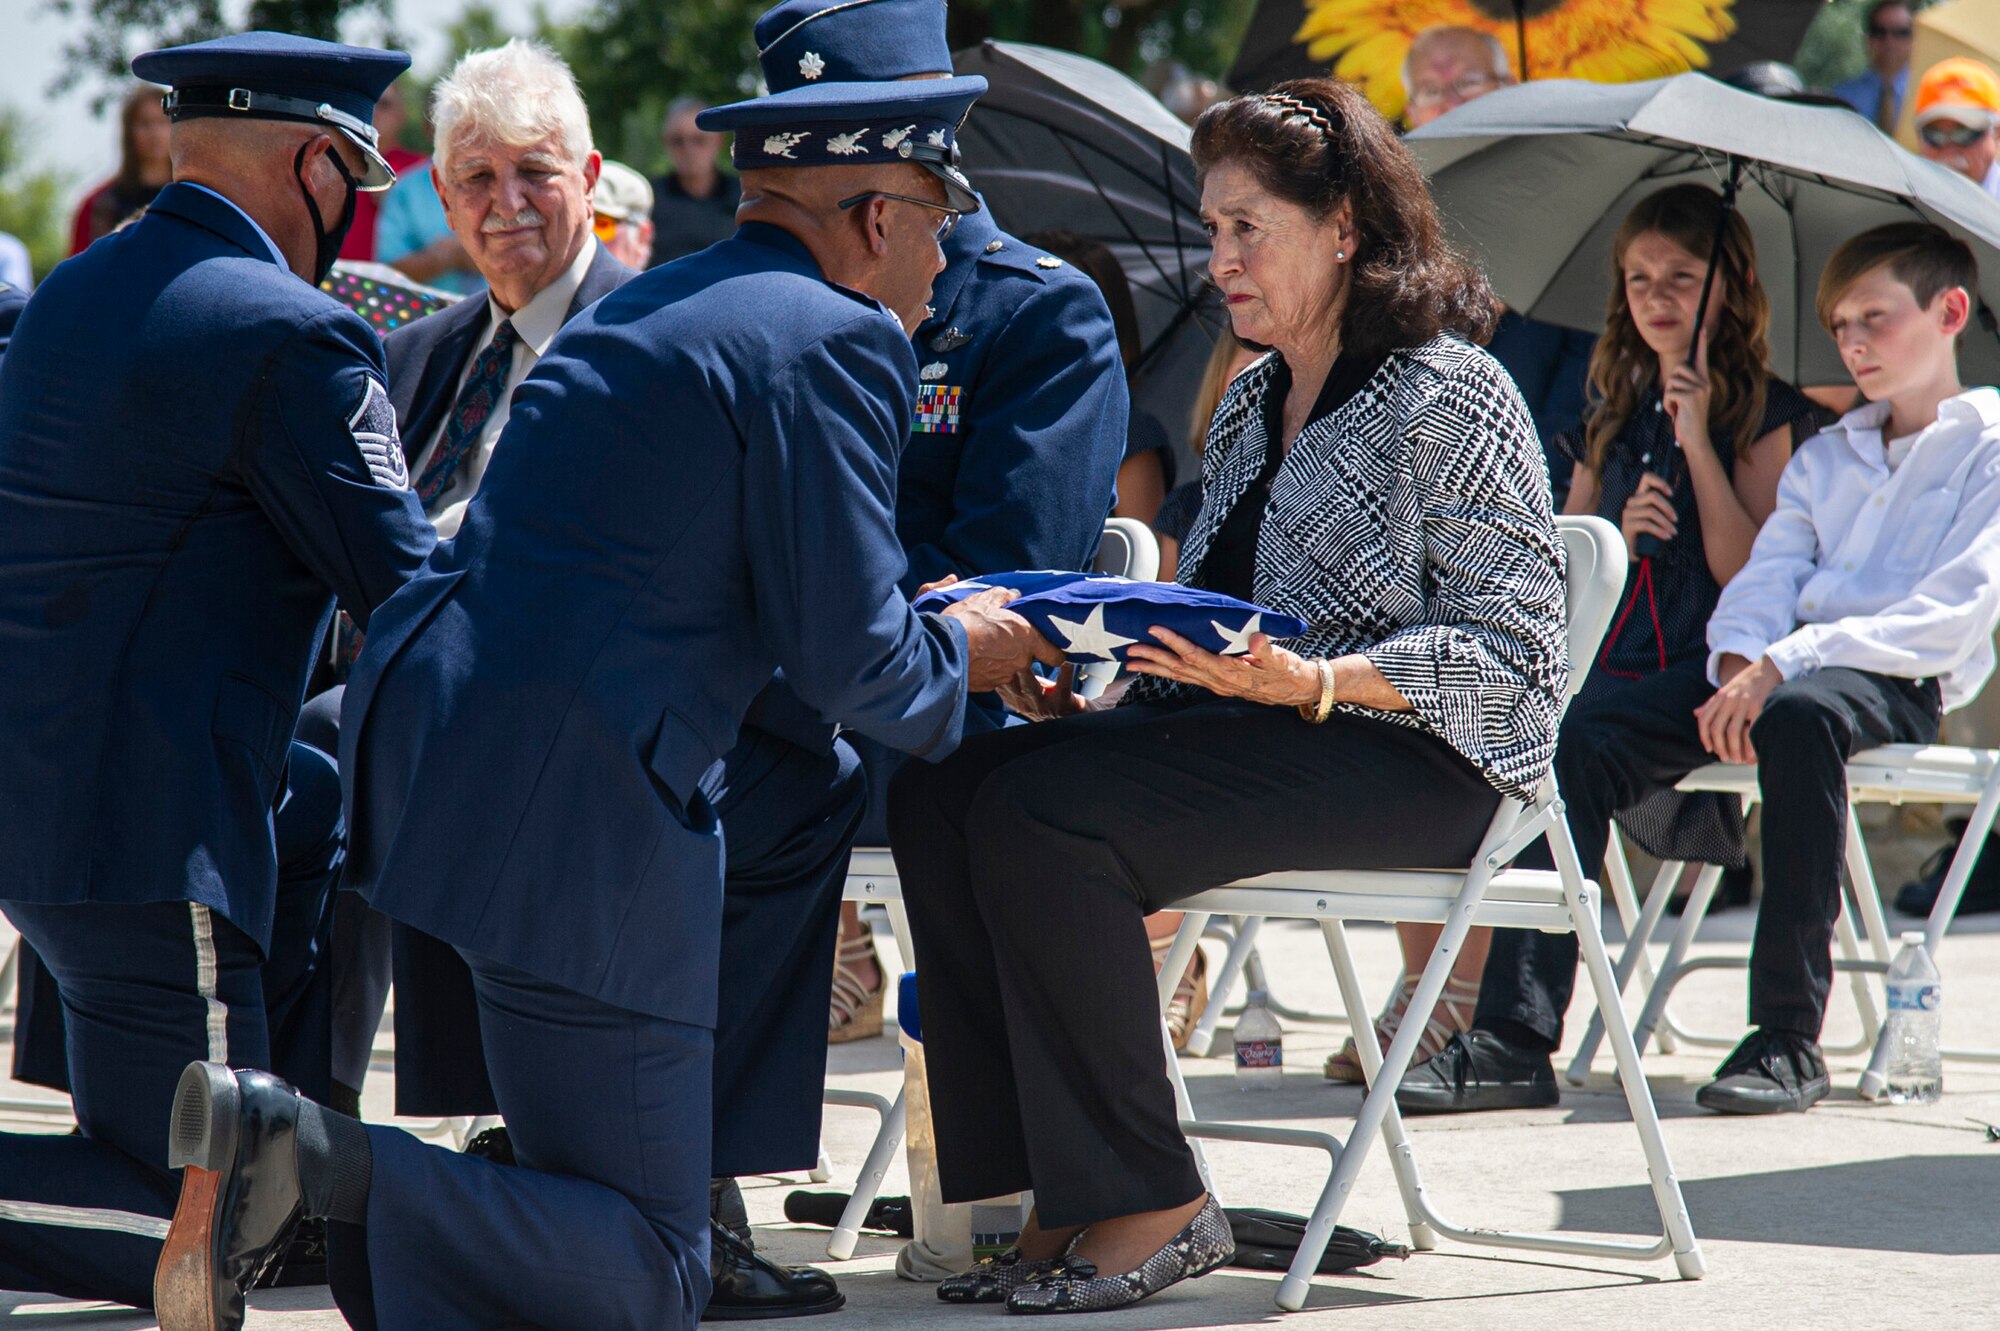 Air Force Chief of Staff Gen. CQ Brown Jr. presents the U.S. flag to retired Col. Richard E. Cole’s daughter, Cindy Chal, during his interment ceremony.